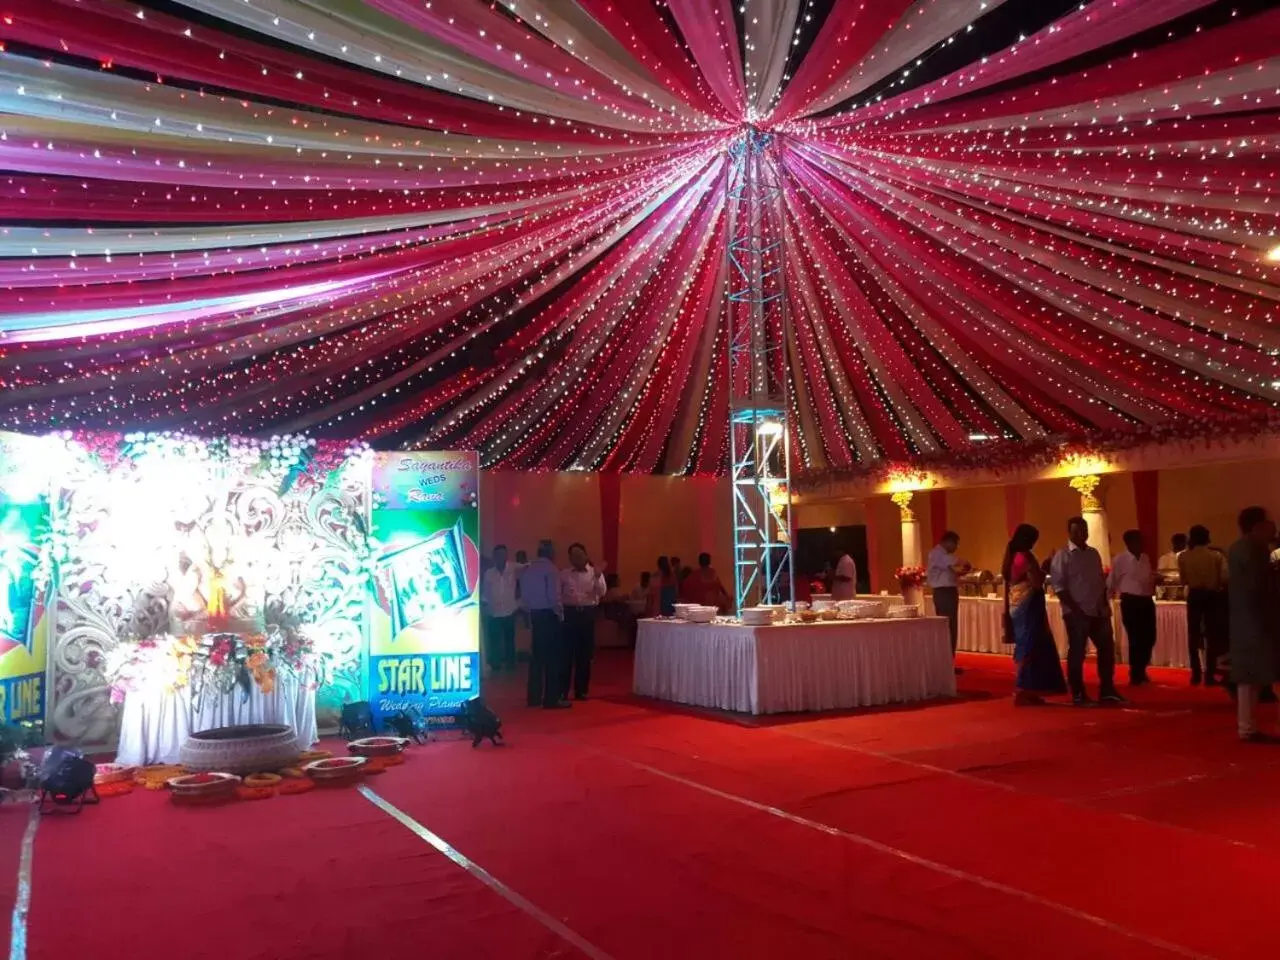 Banquet/Function facilities, Banquet Facilities in Sher-E-Punjab